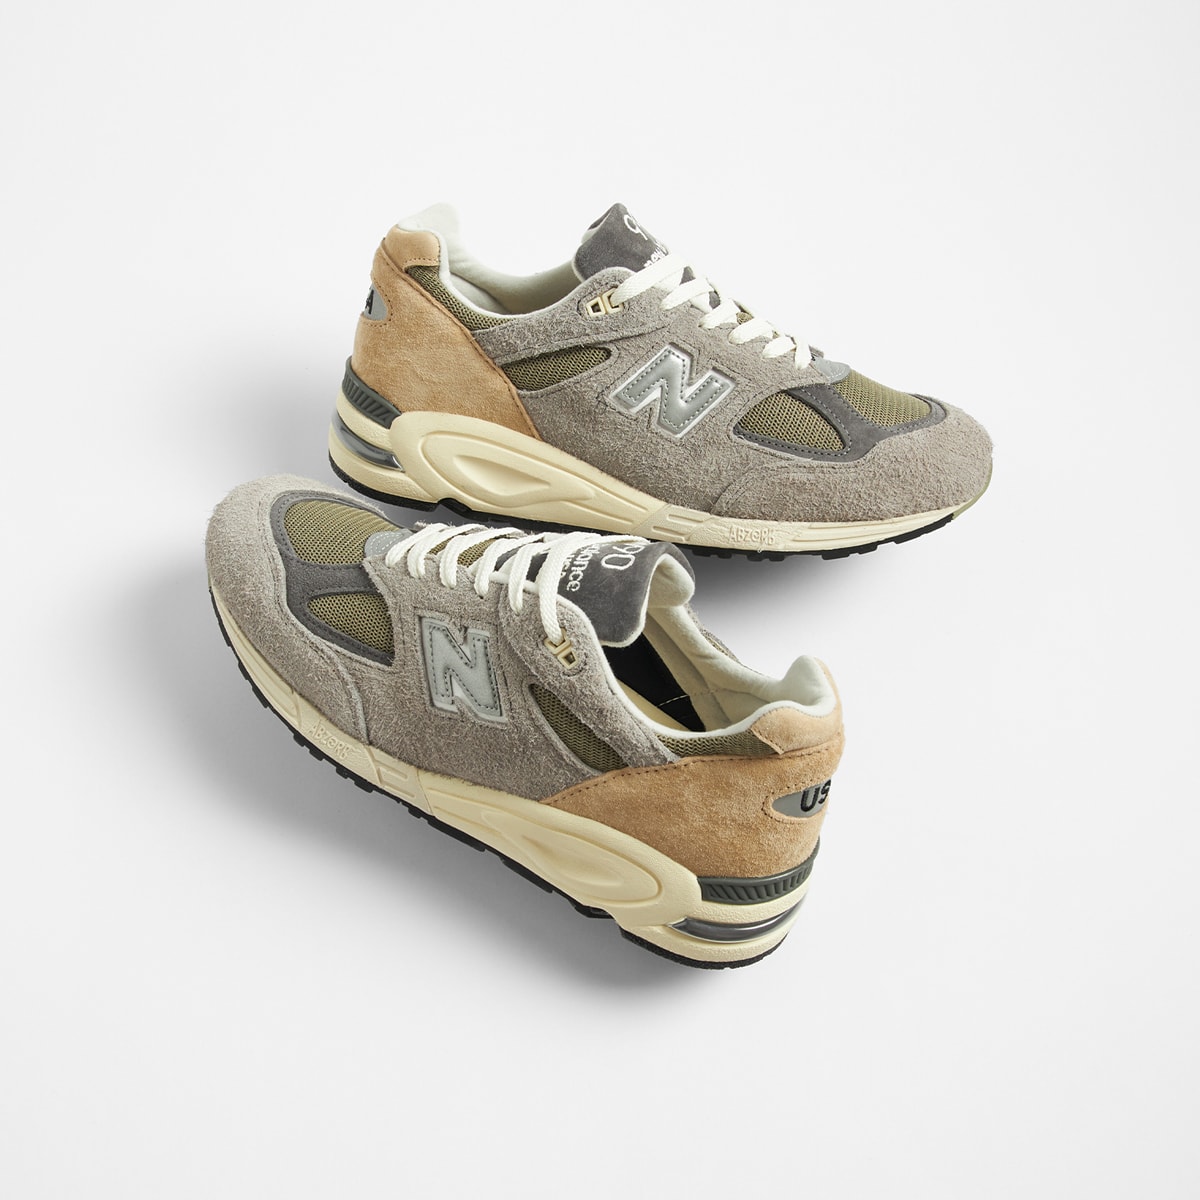 New Balance M990TD2 - Made in USA (Grey & Tan) | END. Launches